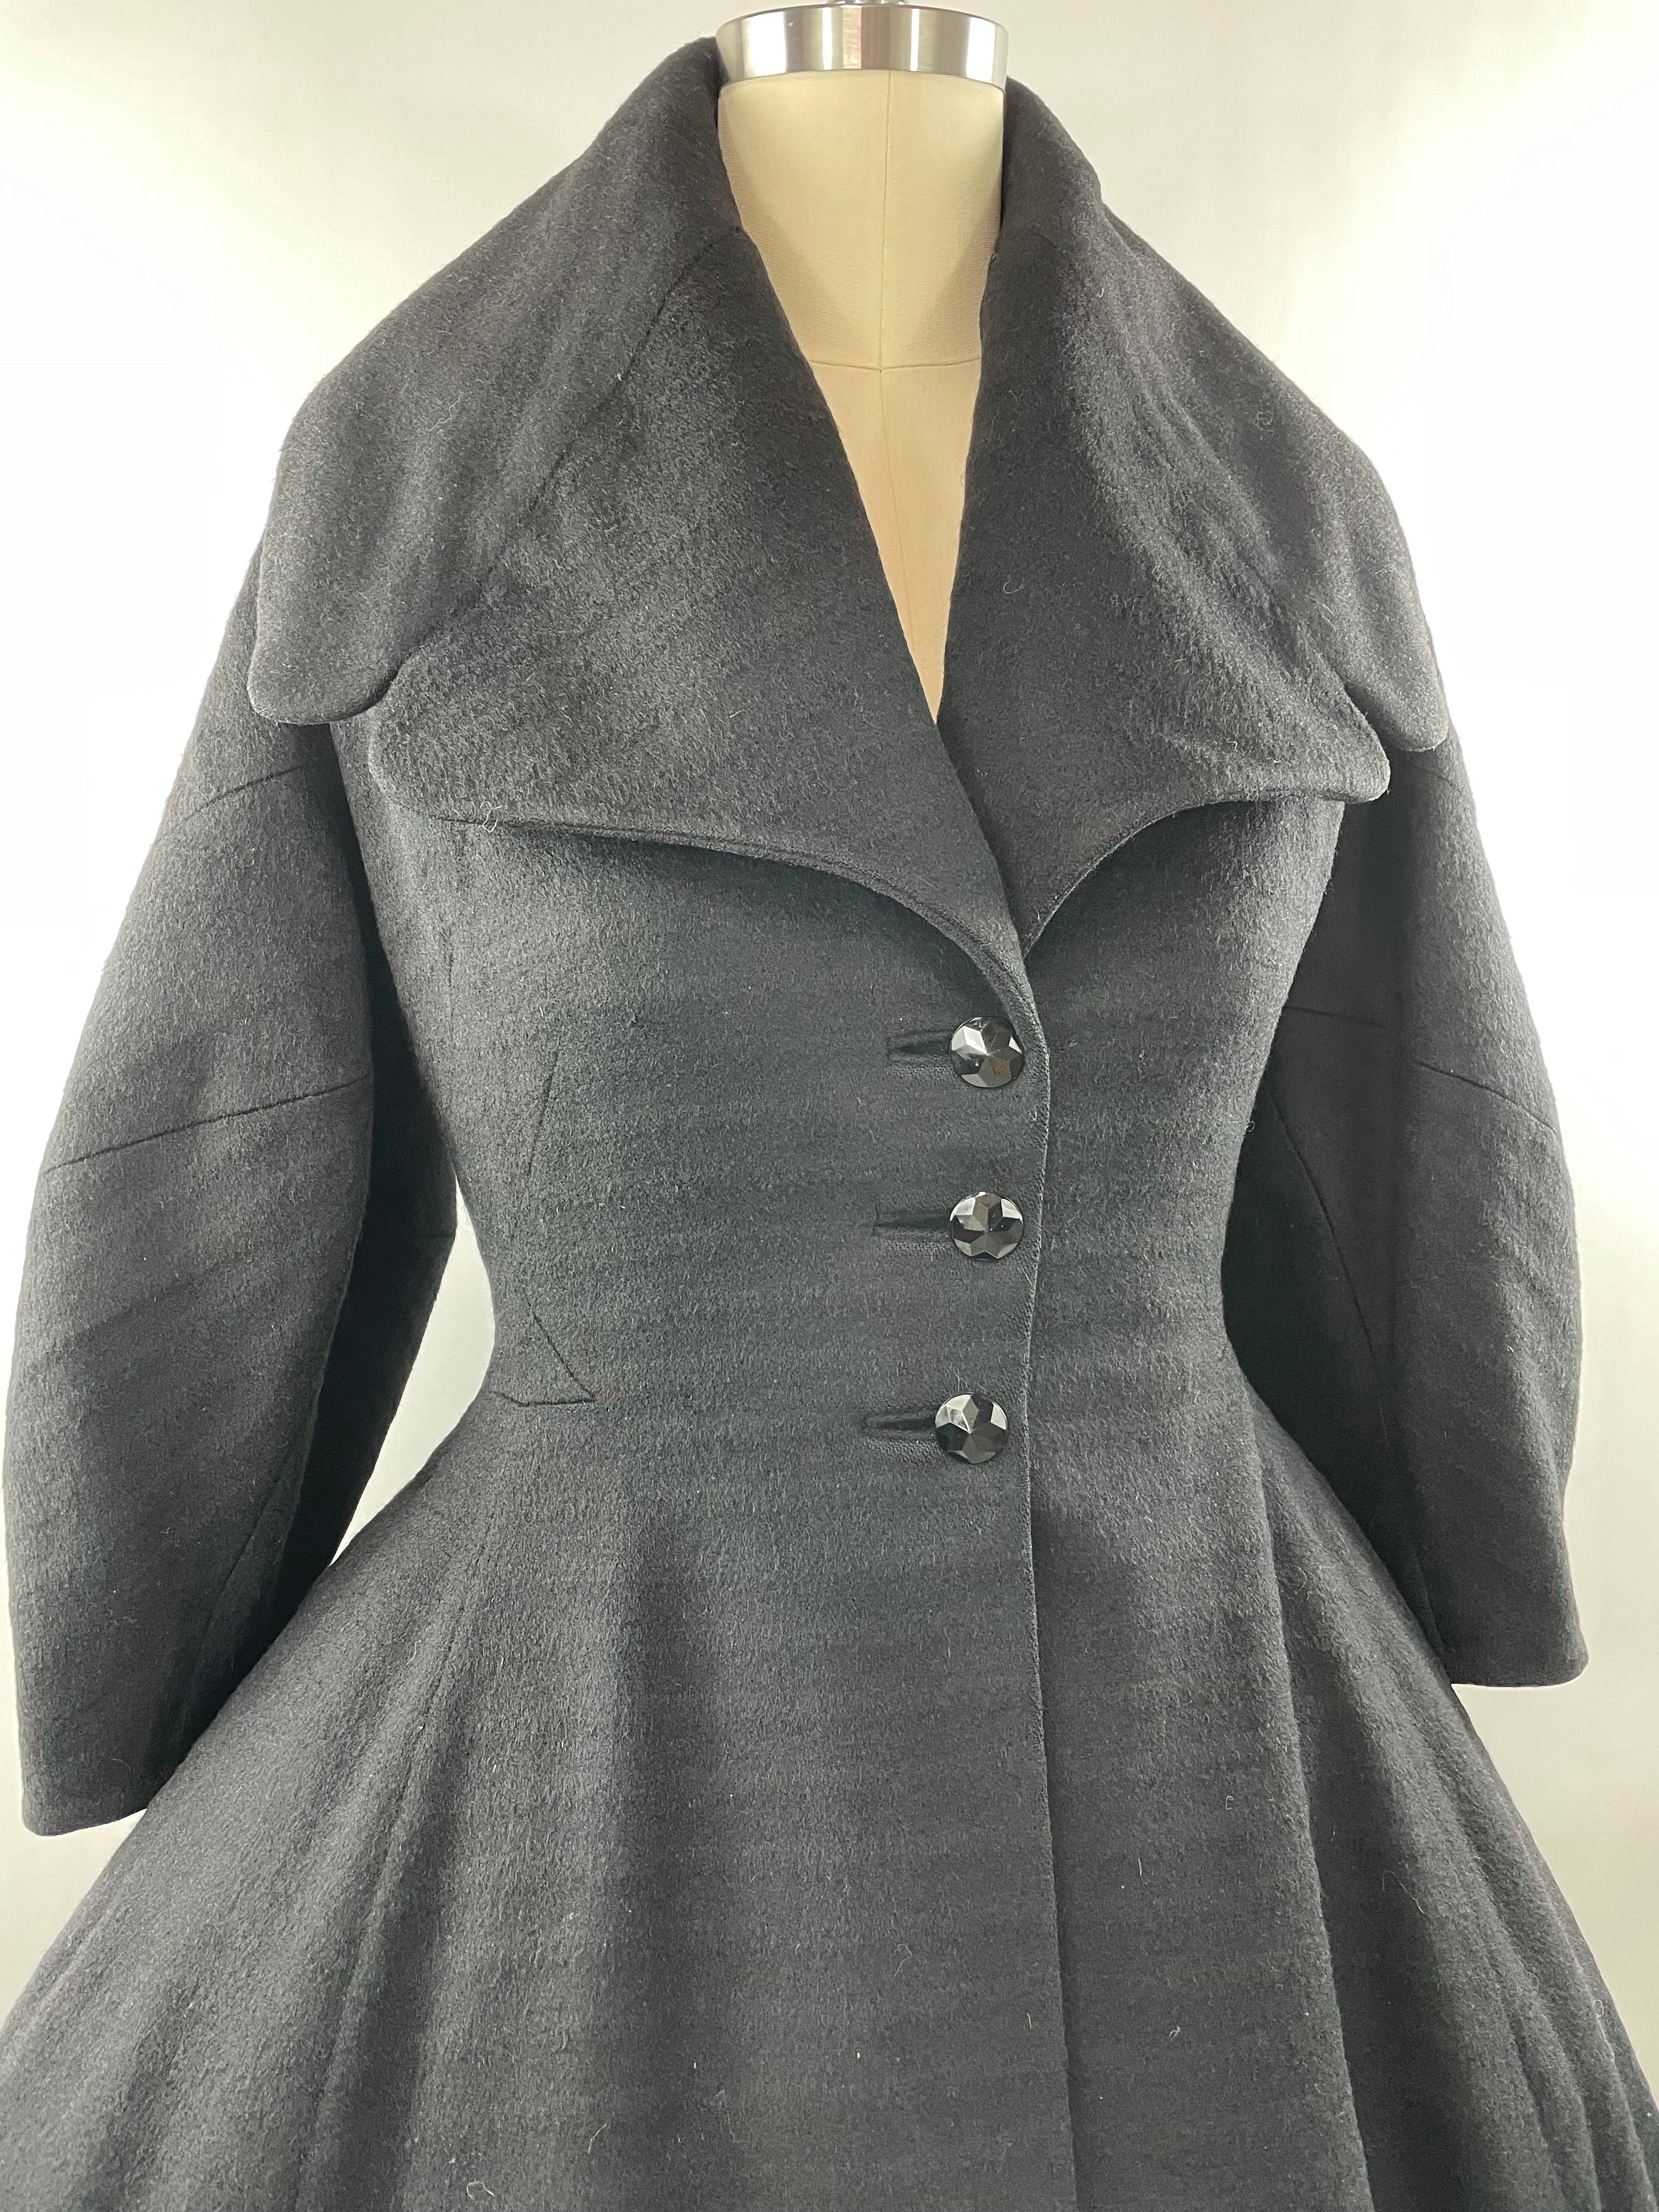 1950s Black Wool Lilli Ann Princess Coat with Exaggerated Collar and Sleeves Size L